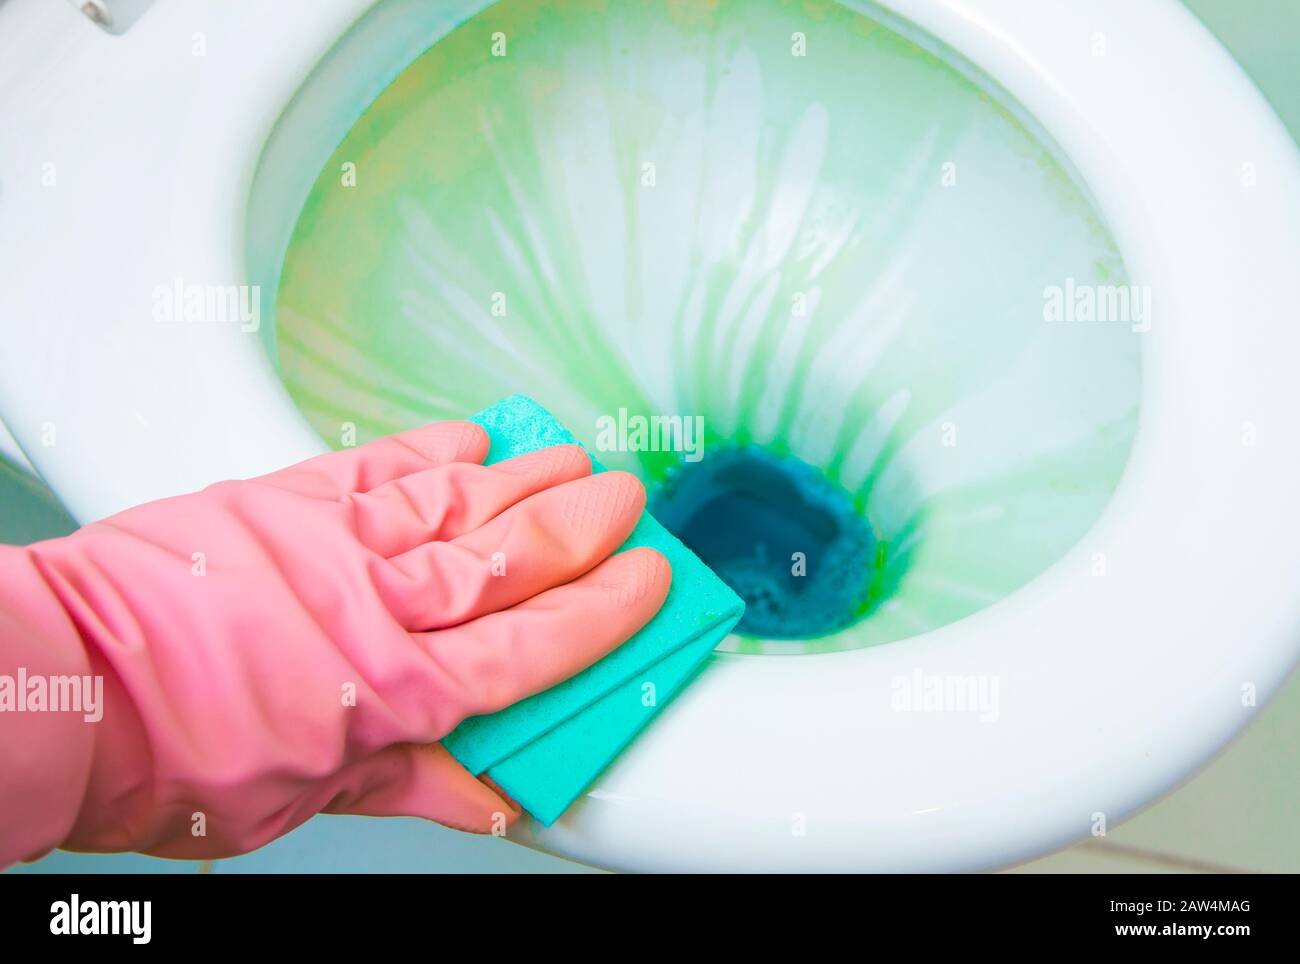 Disinfection of toilet, using colorful antibacterial liquids and cleaning tools. Close up view. Stock Photo